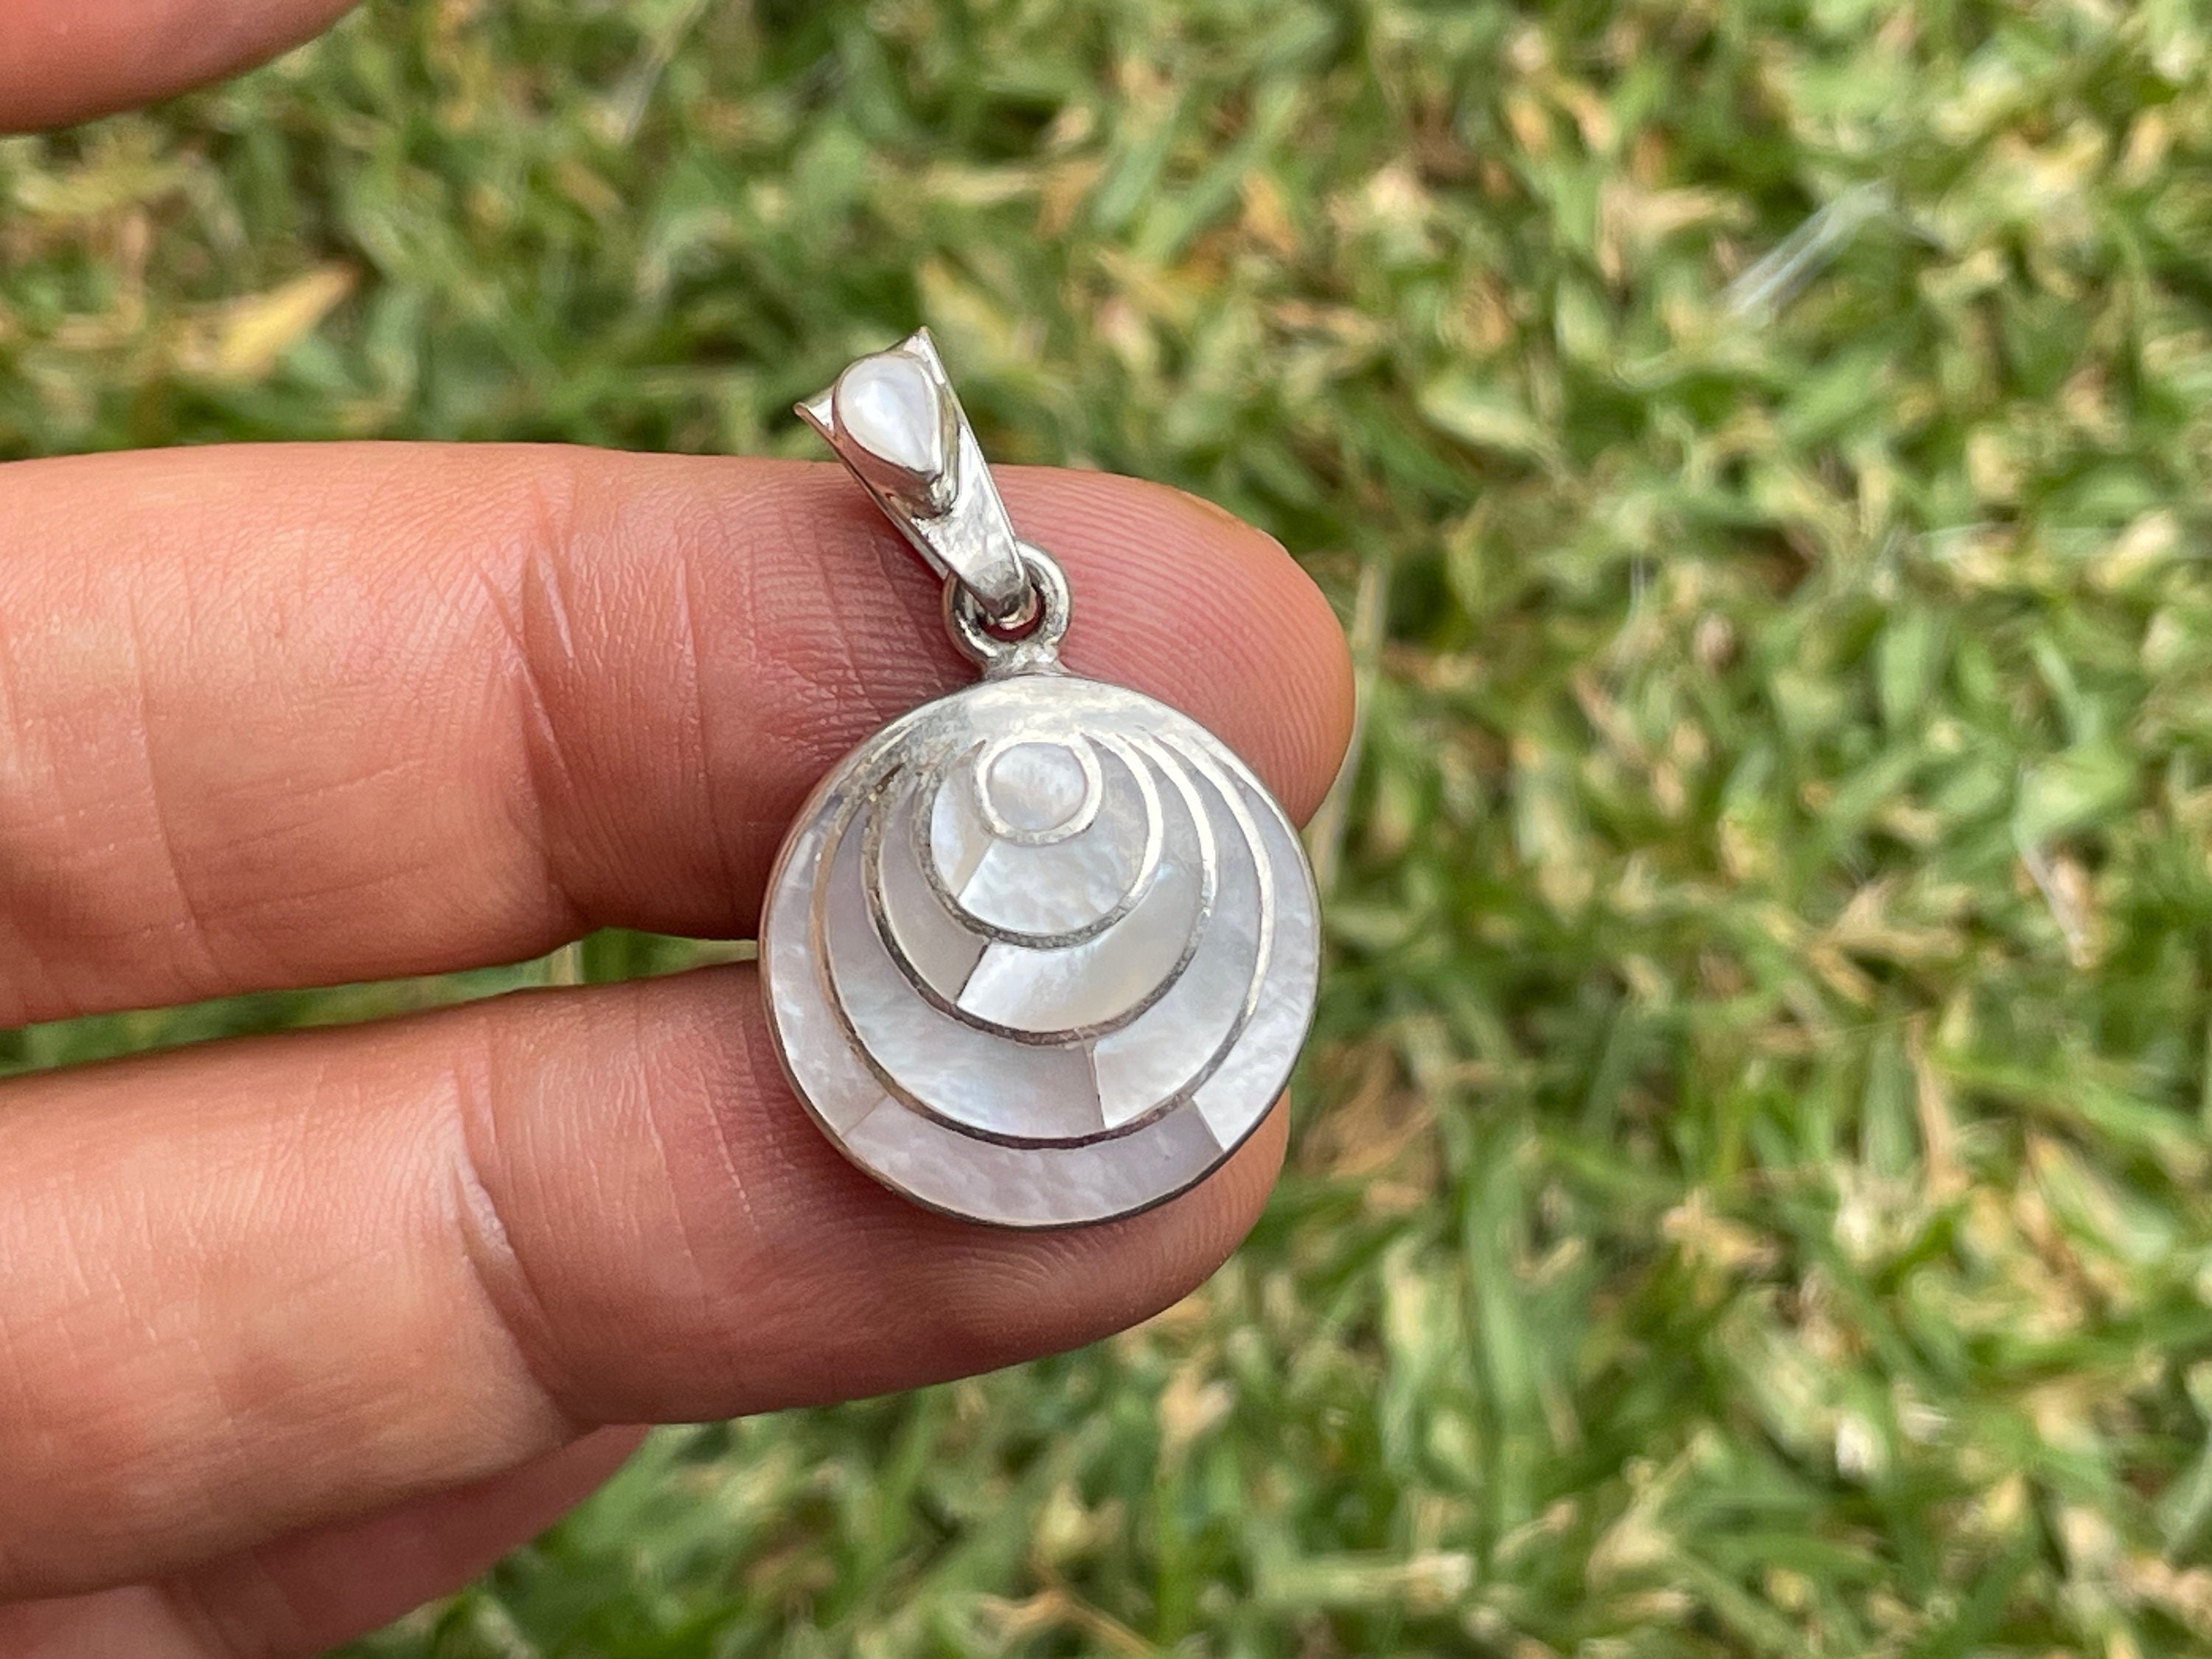 Pearl Spiral Necklace